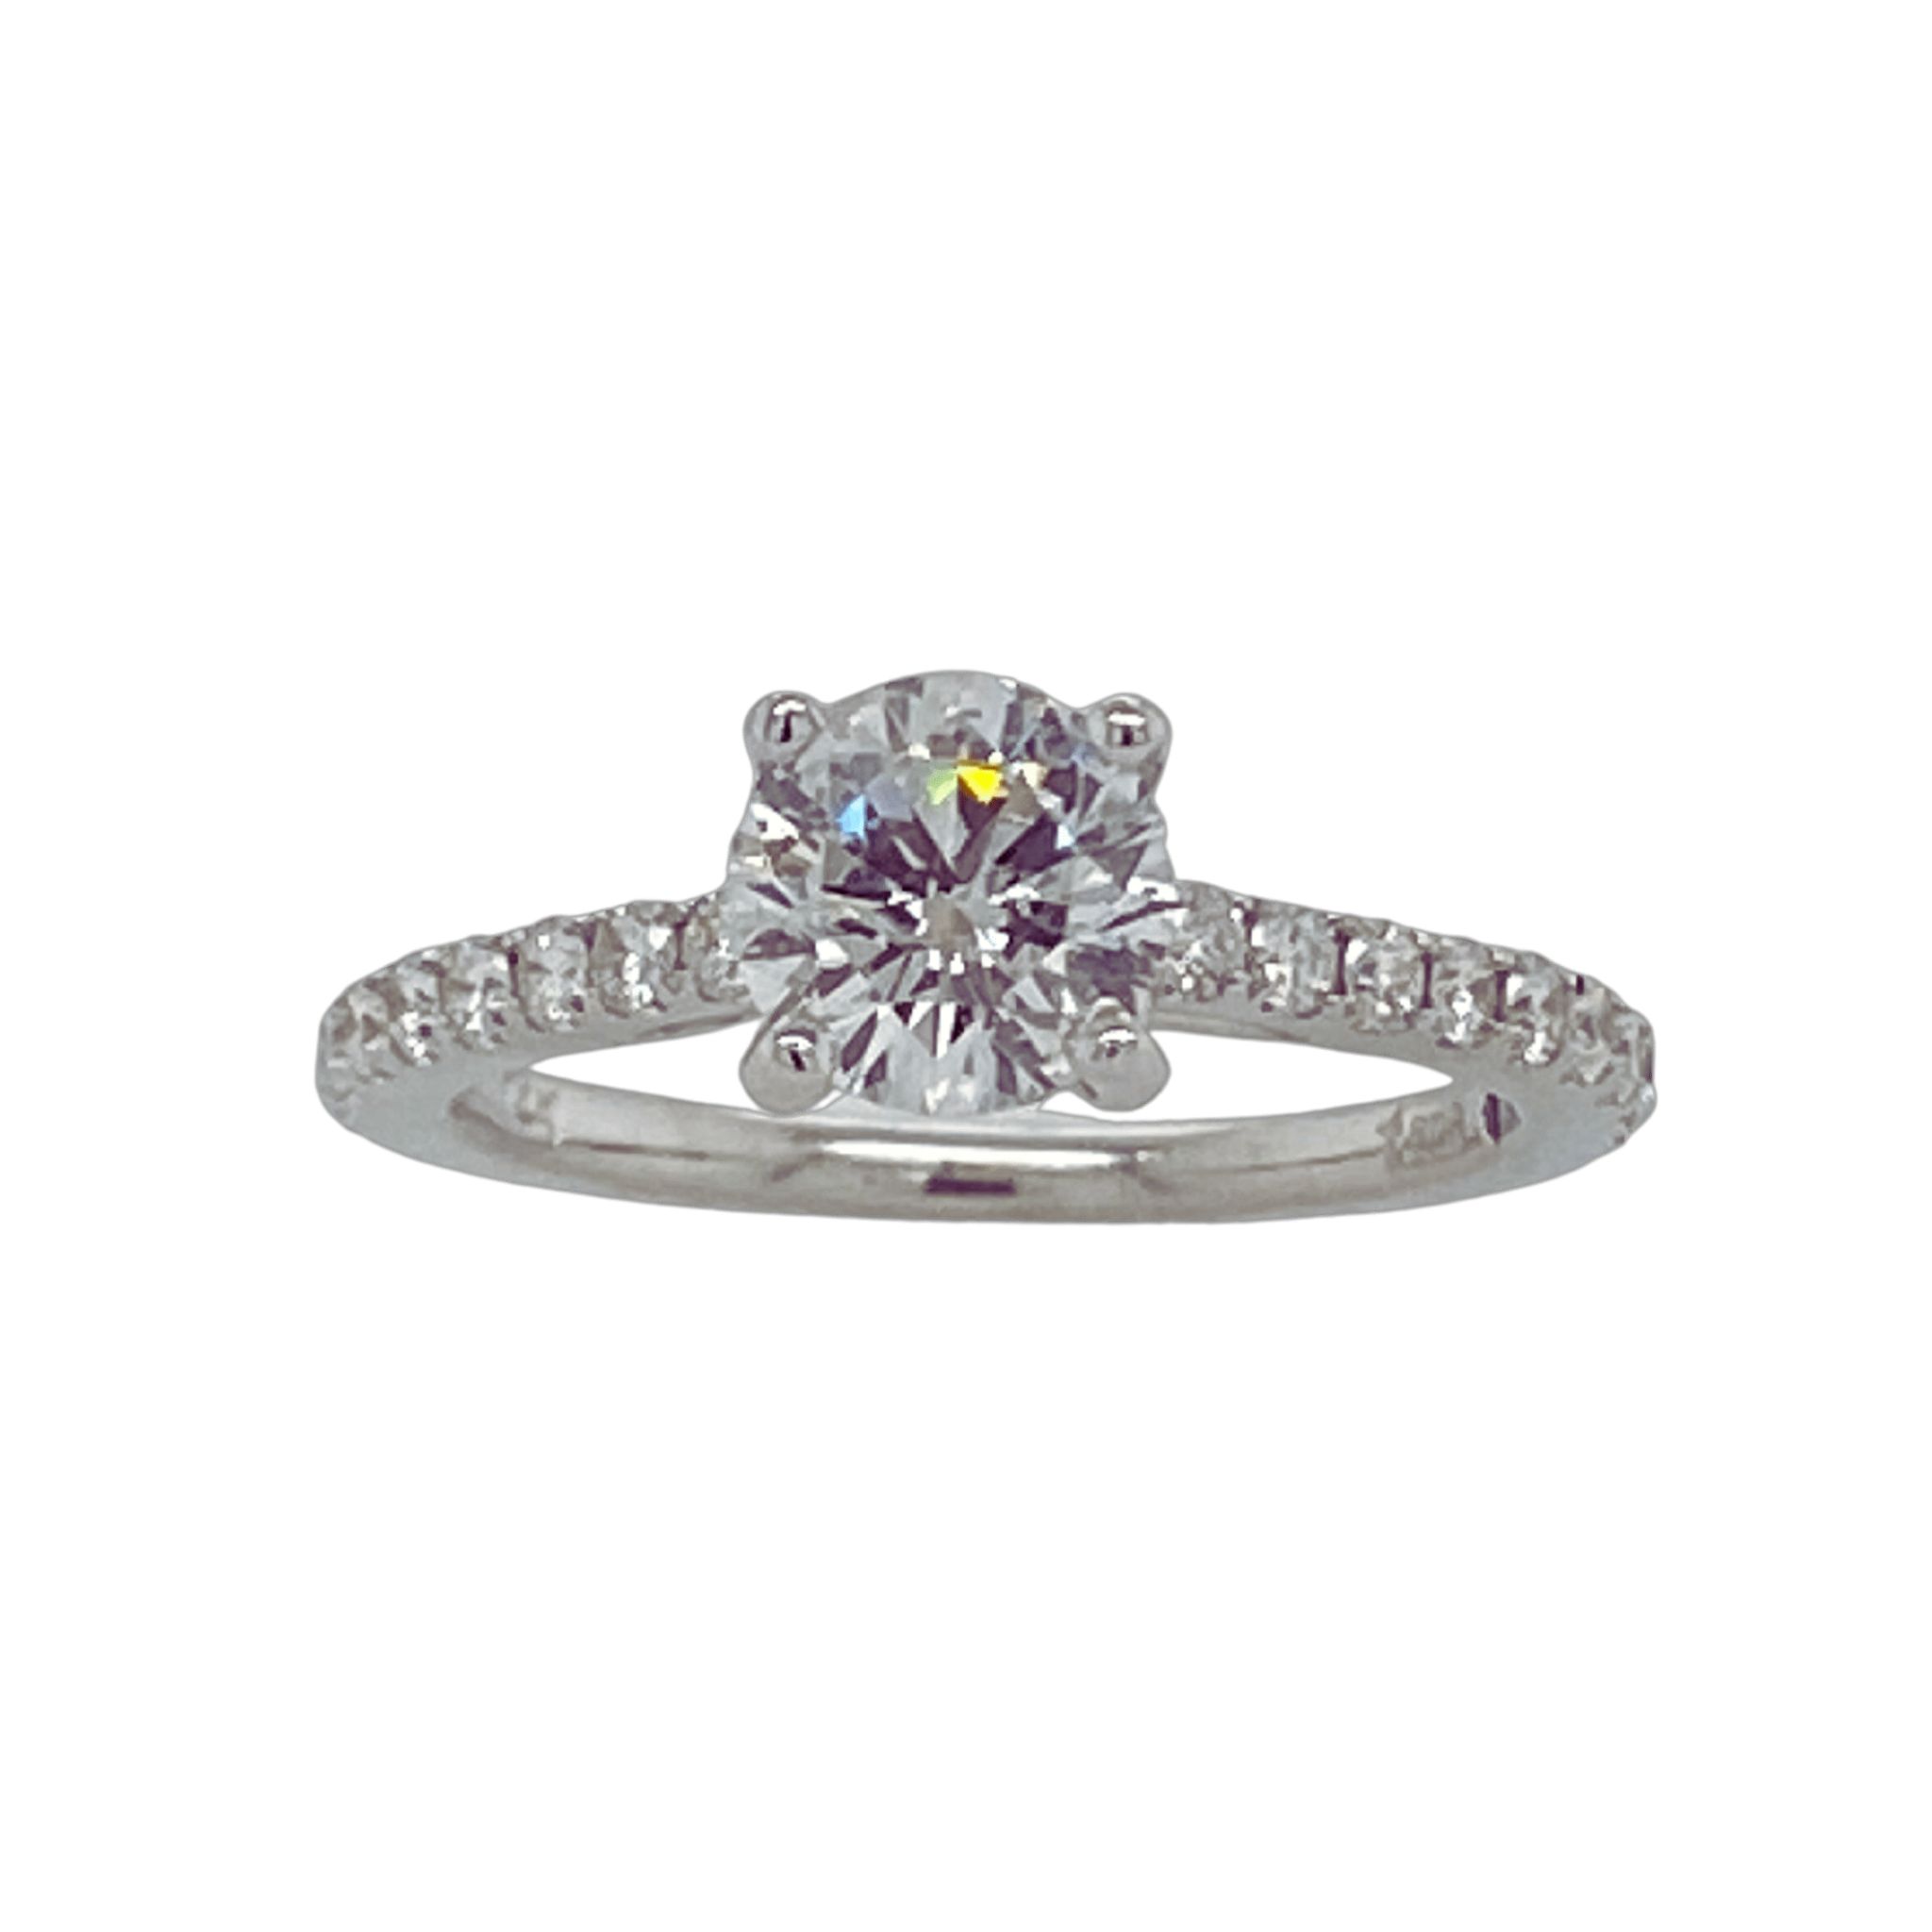 14KW Fancy Solitaire Diamond Engagement Ring - Center Rnd Dia 1.10ct E I1 AGS CERT + .42ctw G/H SI1 Size 6.75